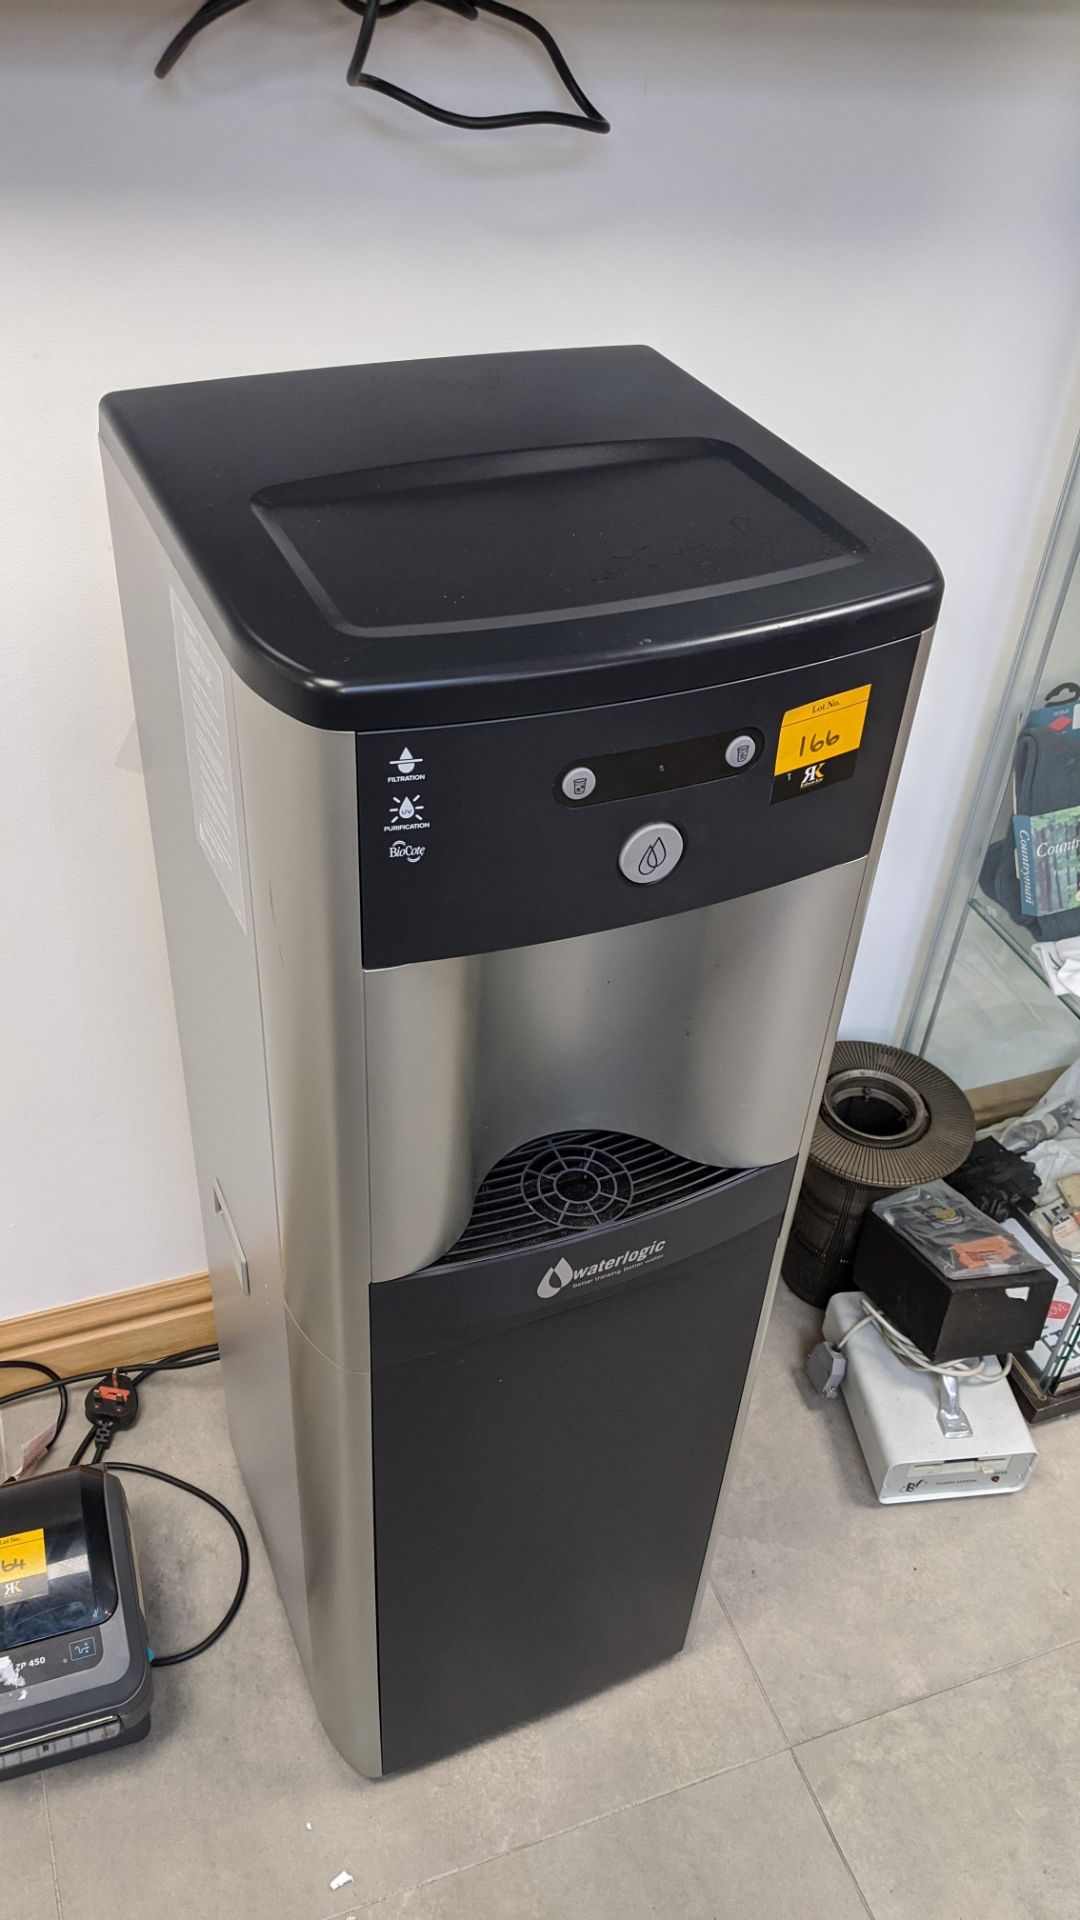 Waterlogic water cooler/dispenser, C/OFS2005 Please note, lots 1 - 200 are located at Samson